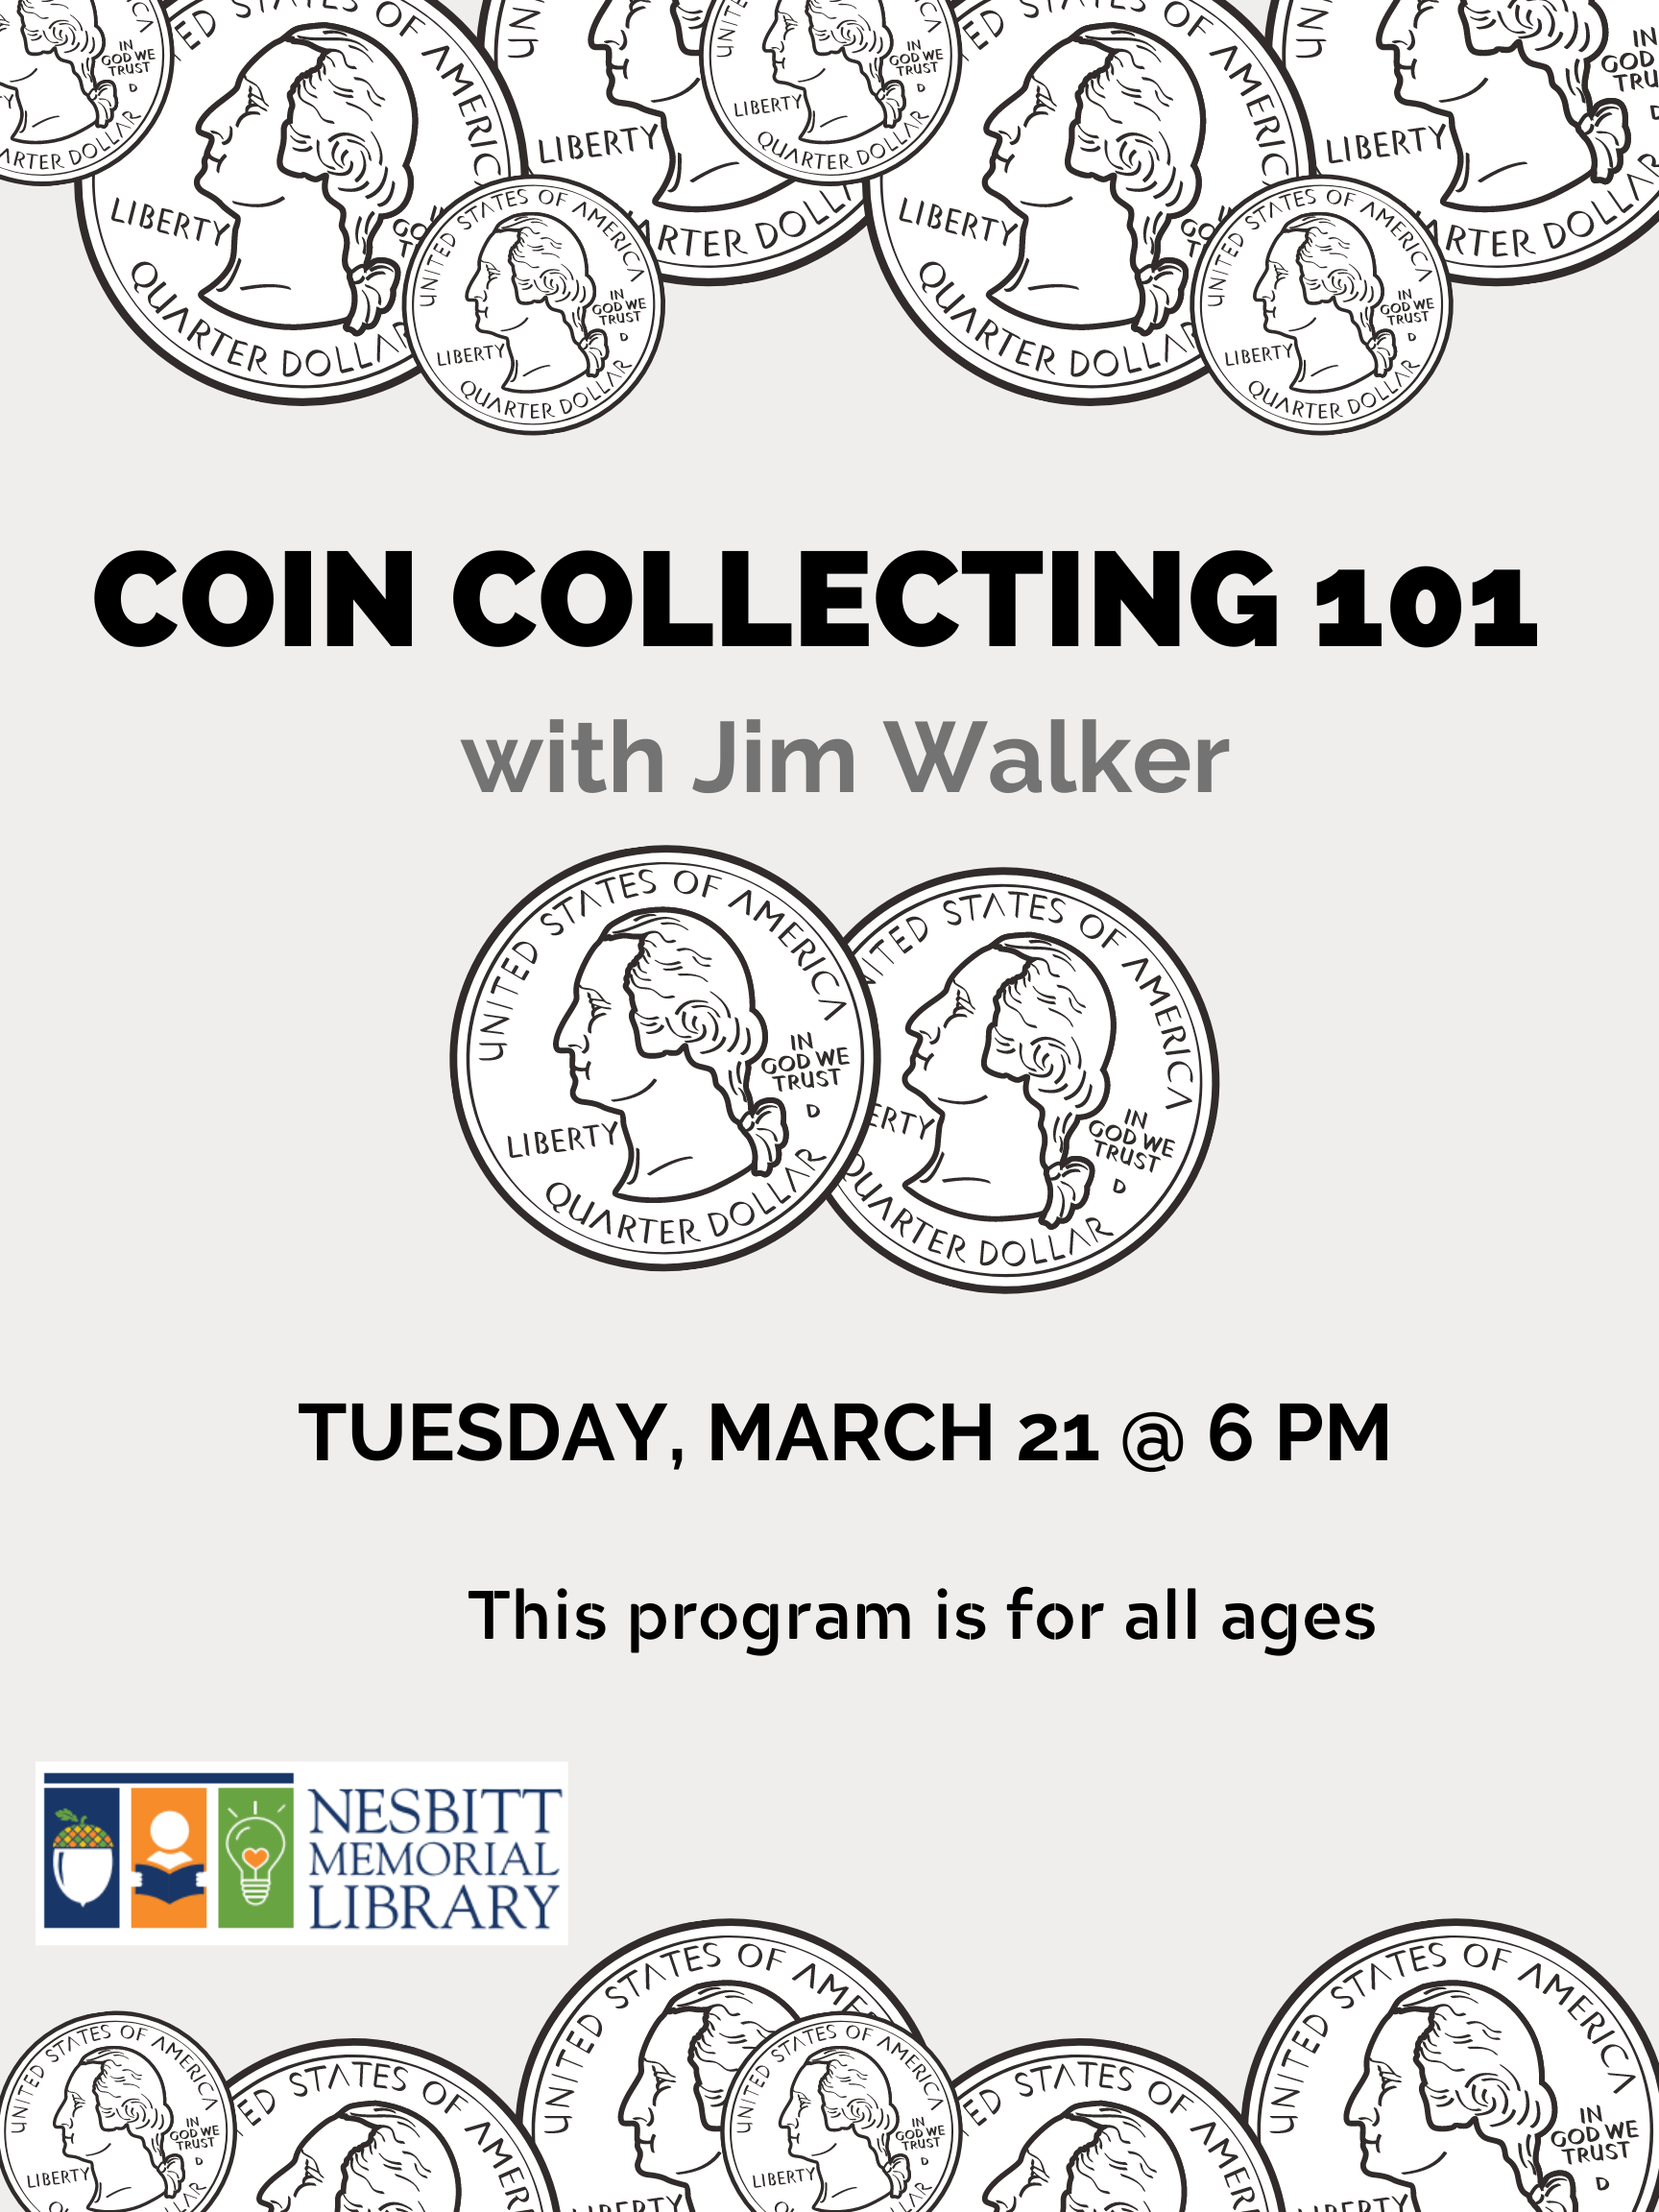 Coin Collecting 101 w/Jim Walker Tue Mar 21 @ 6 PM